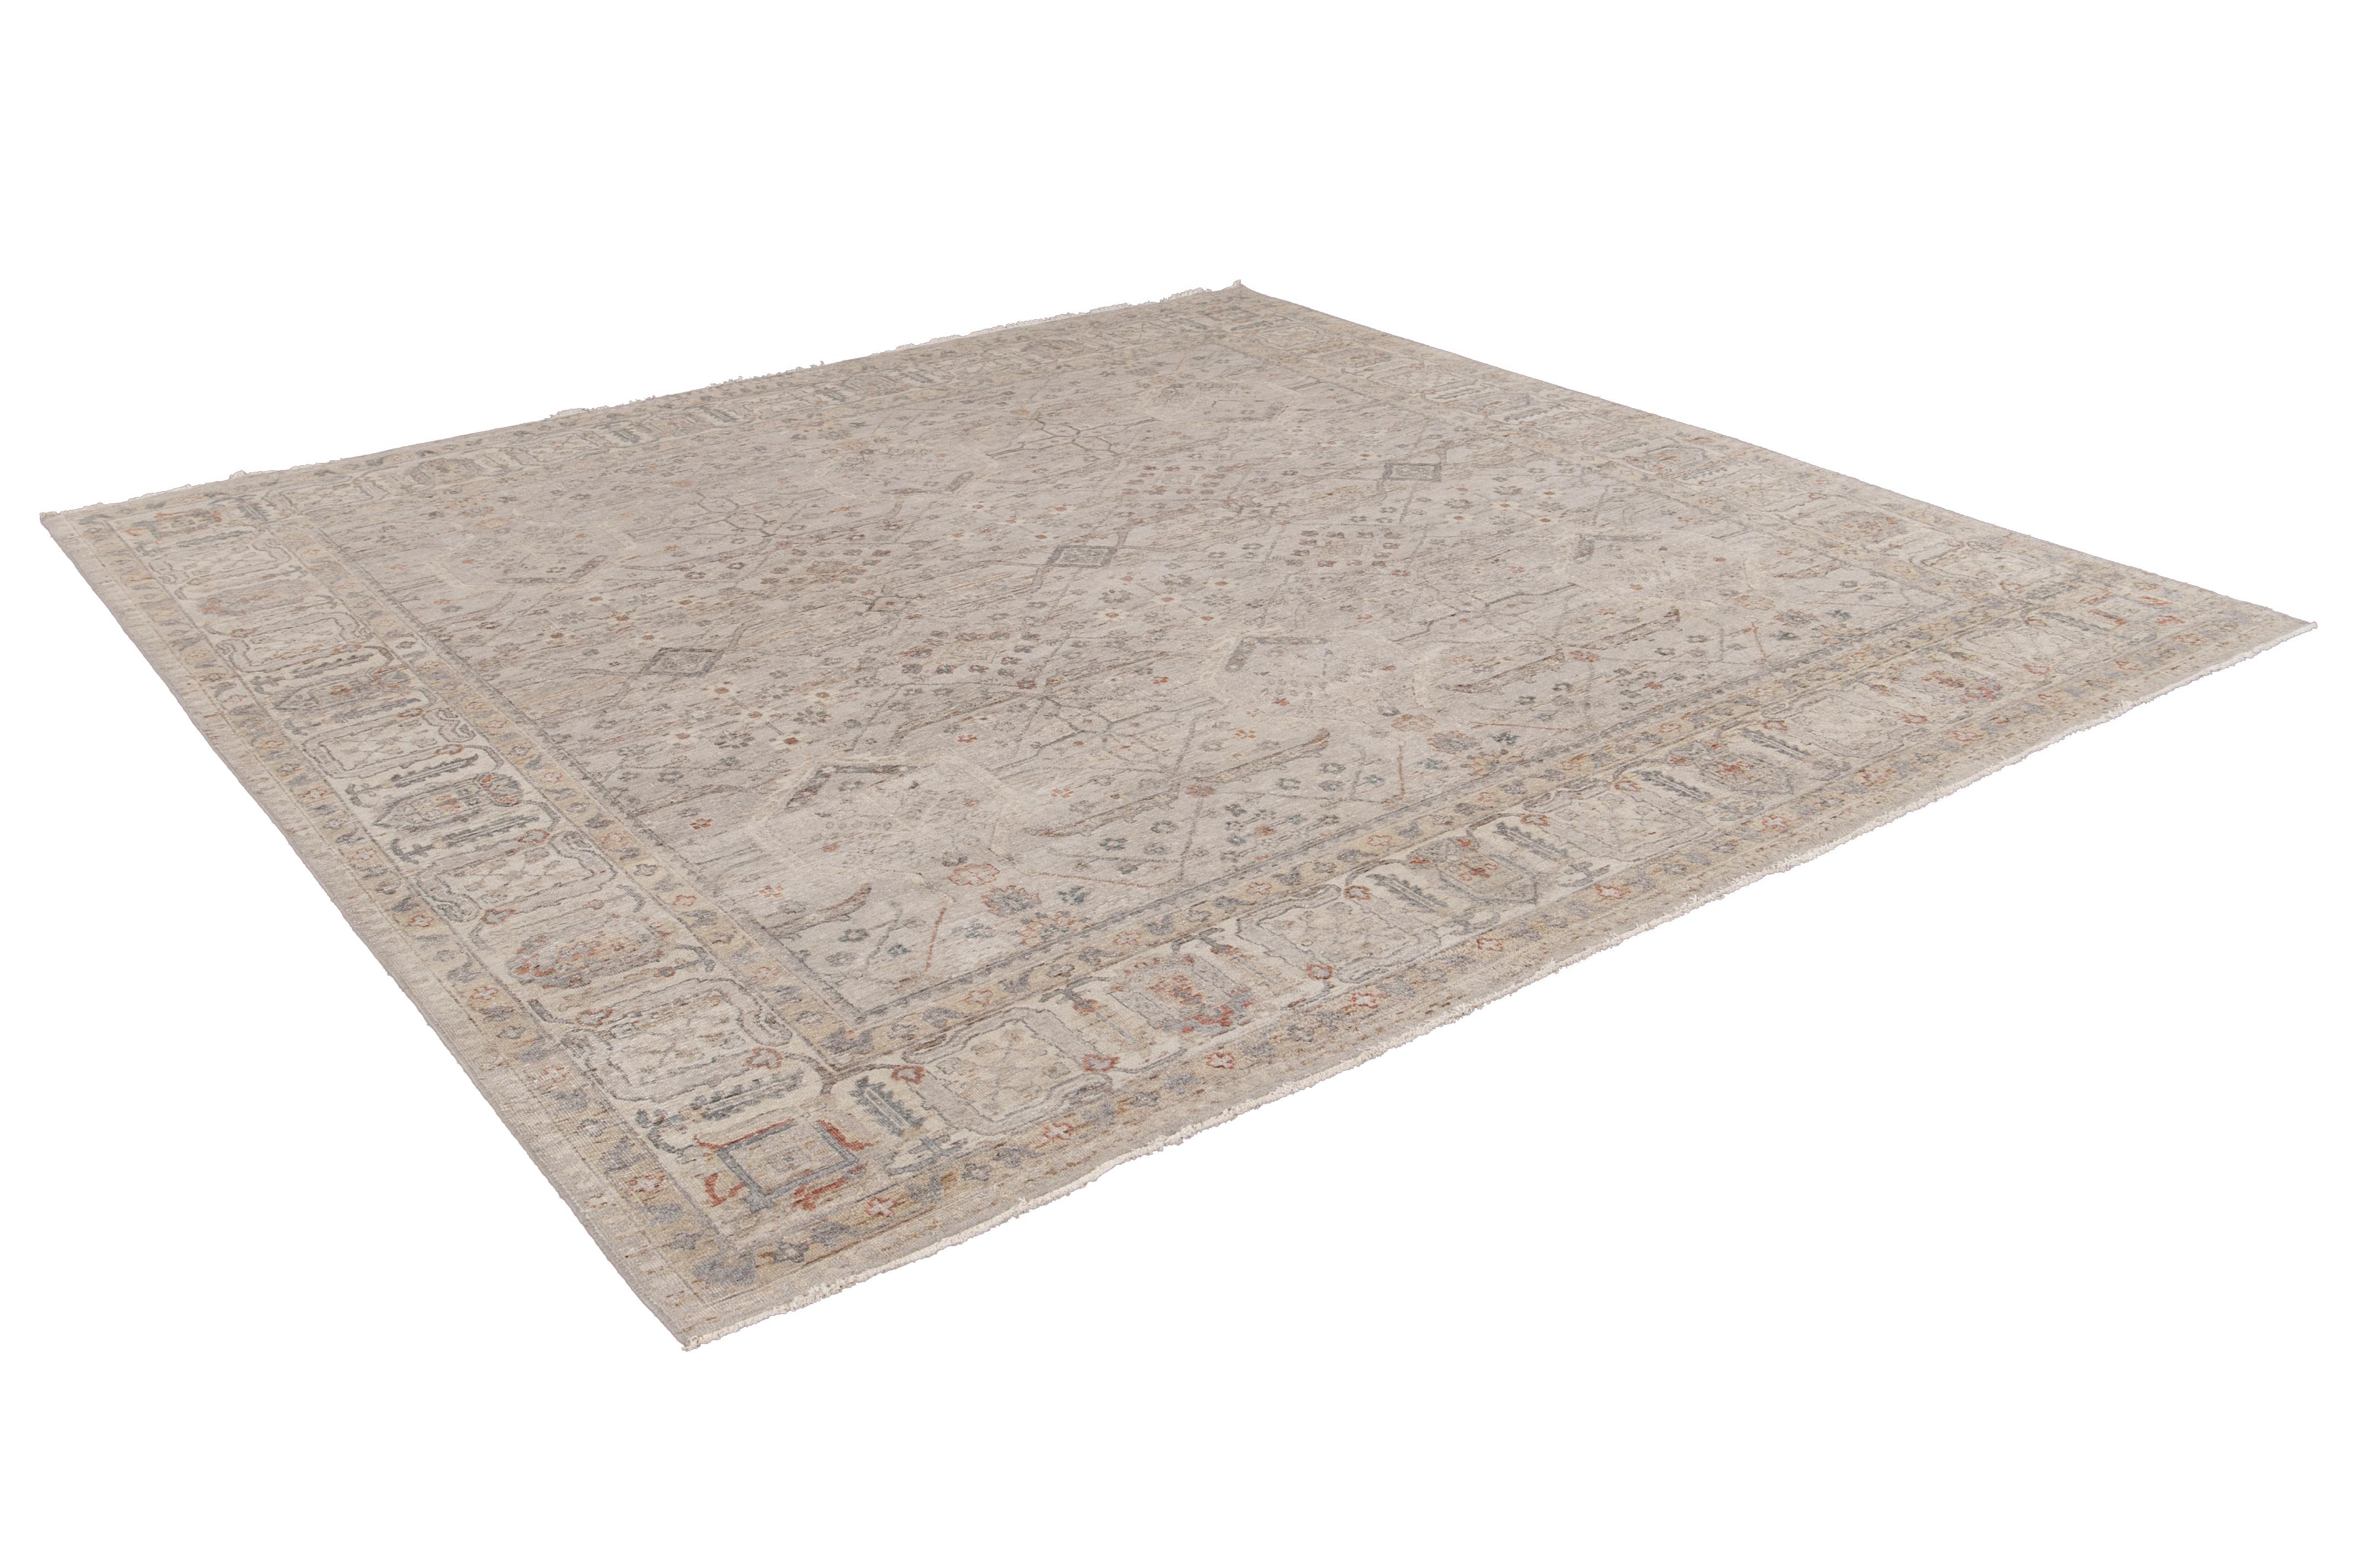 21st Century Contemporary Indian Square Wool Rug 11